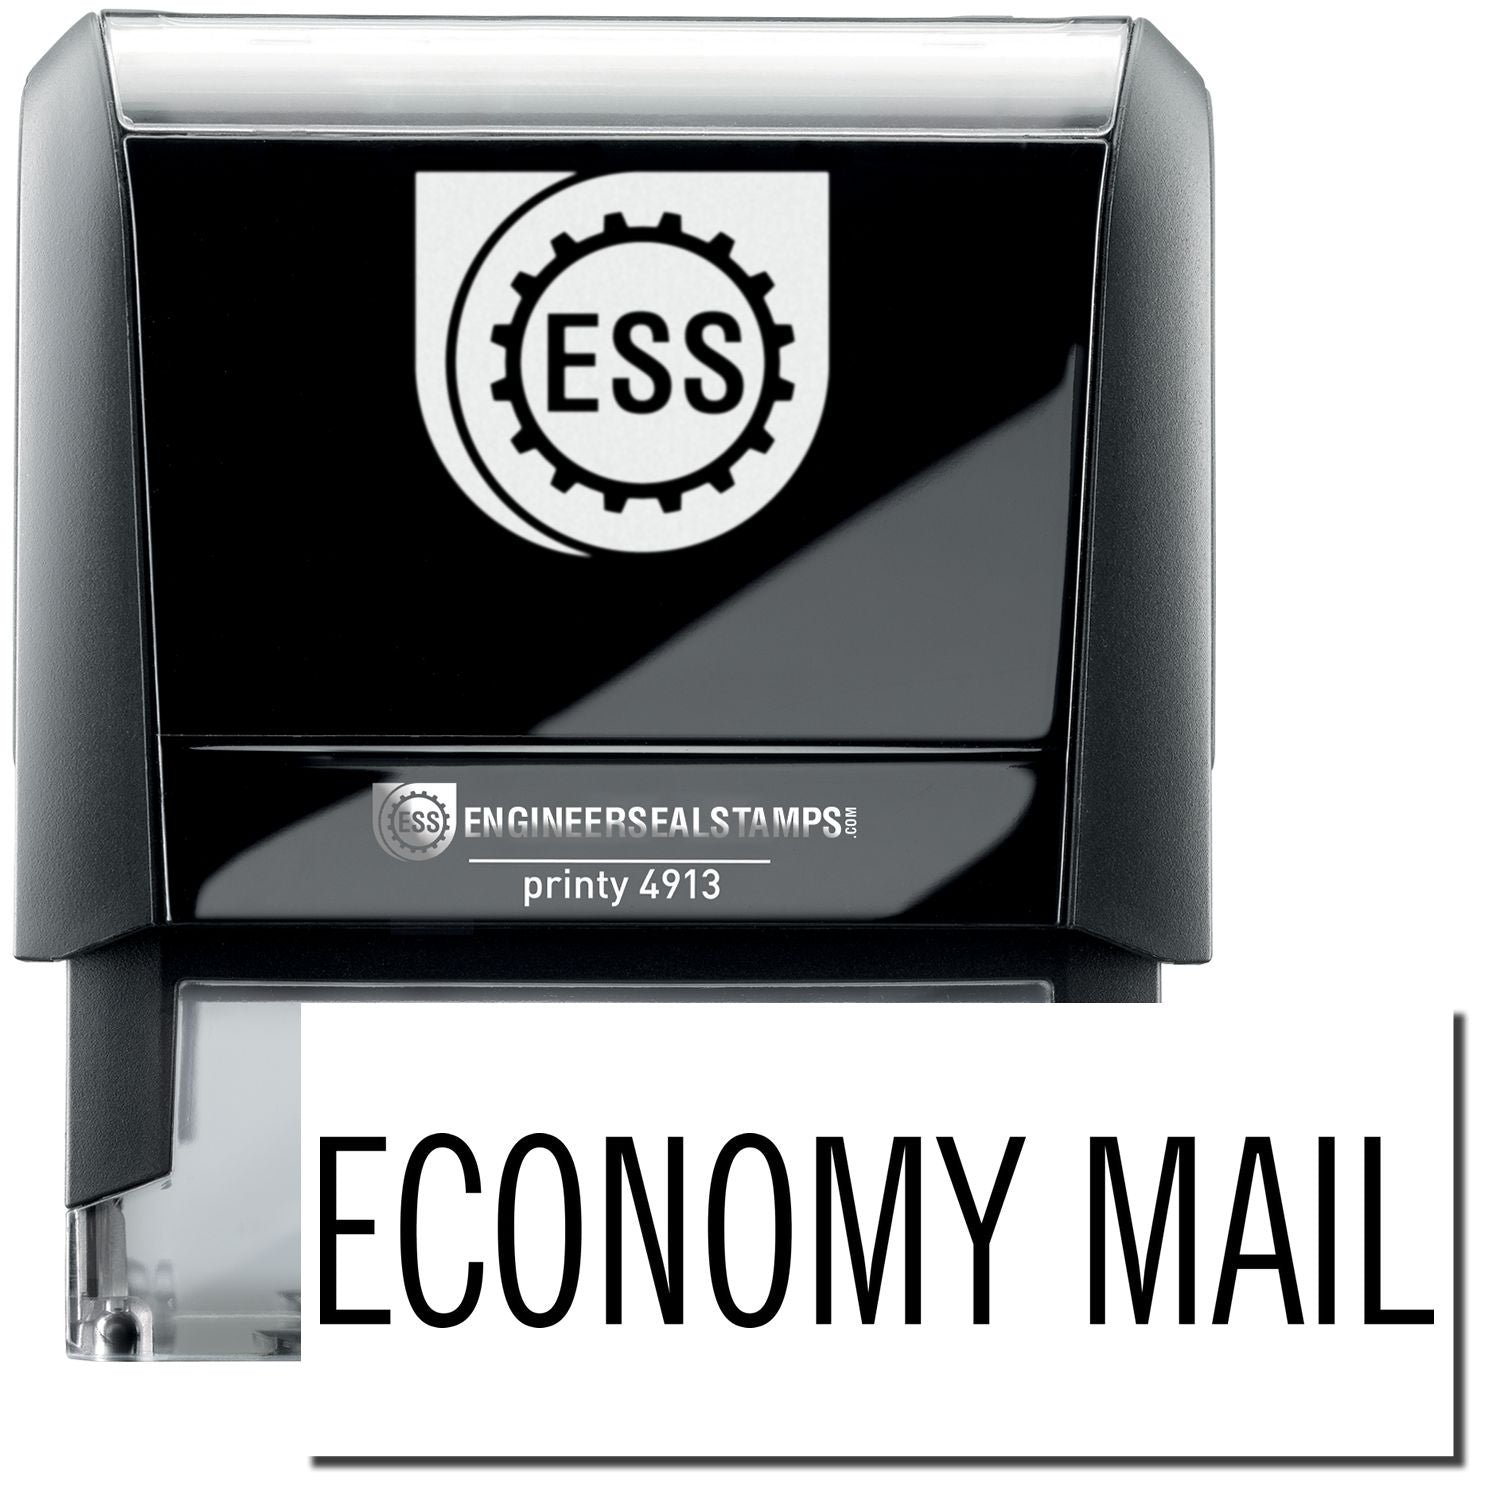 A self-inking stamp with a stamped image showing how the text "ECONOMY MAIL" in a large font is displayed by it after stamping.